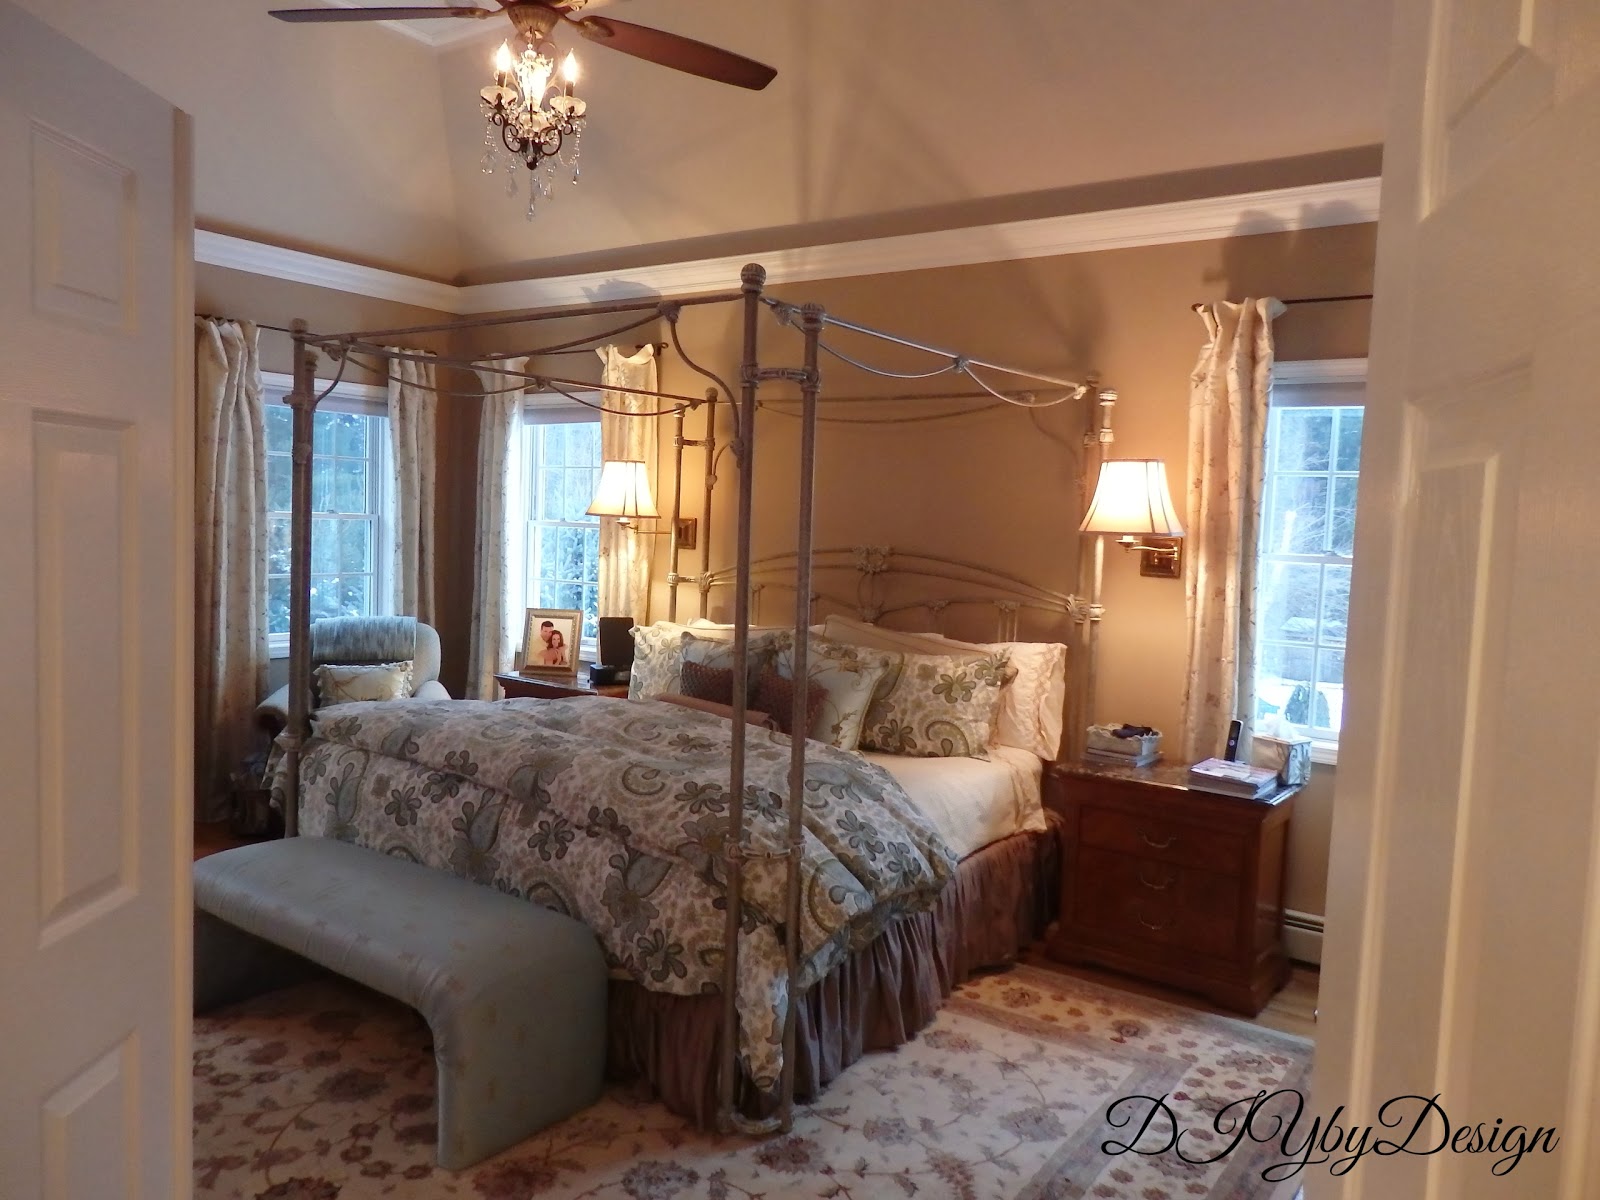 DIY by Design: Master Bedroom Retreat - A New Addition